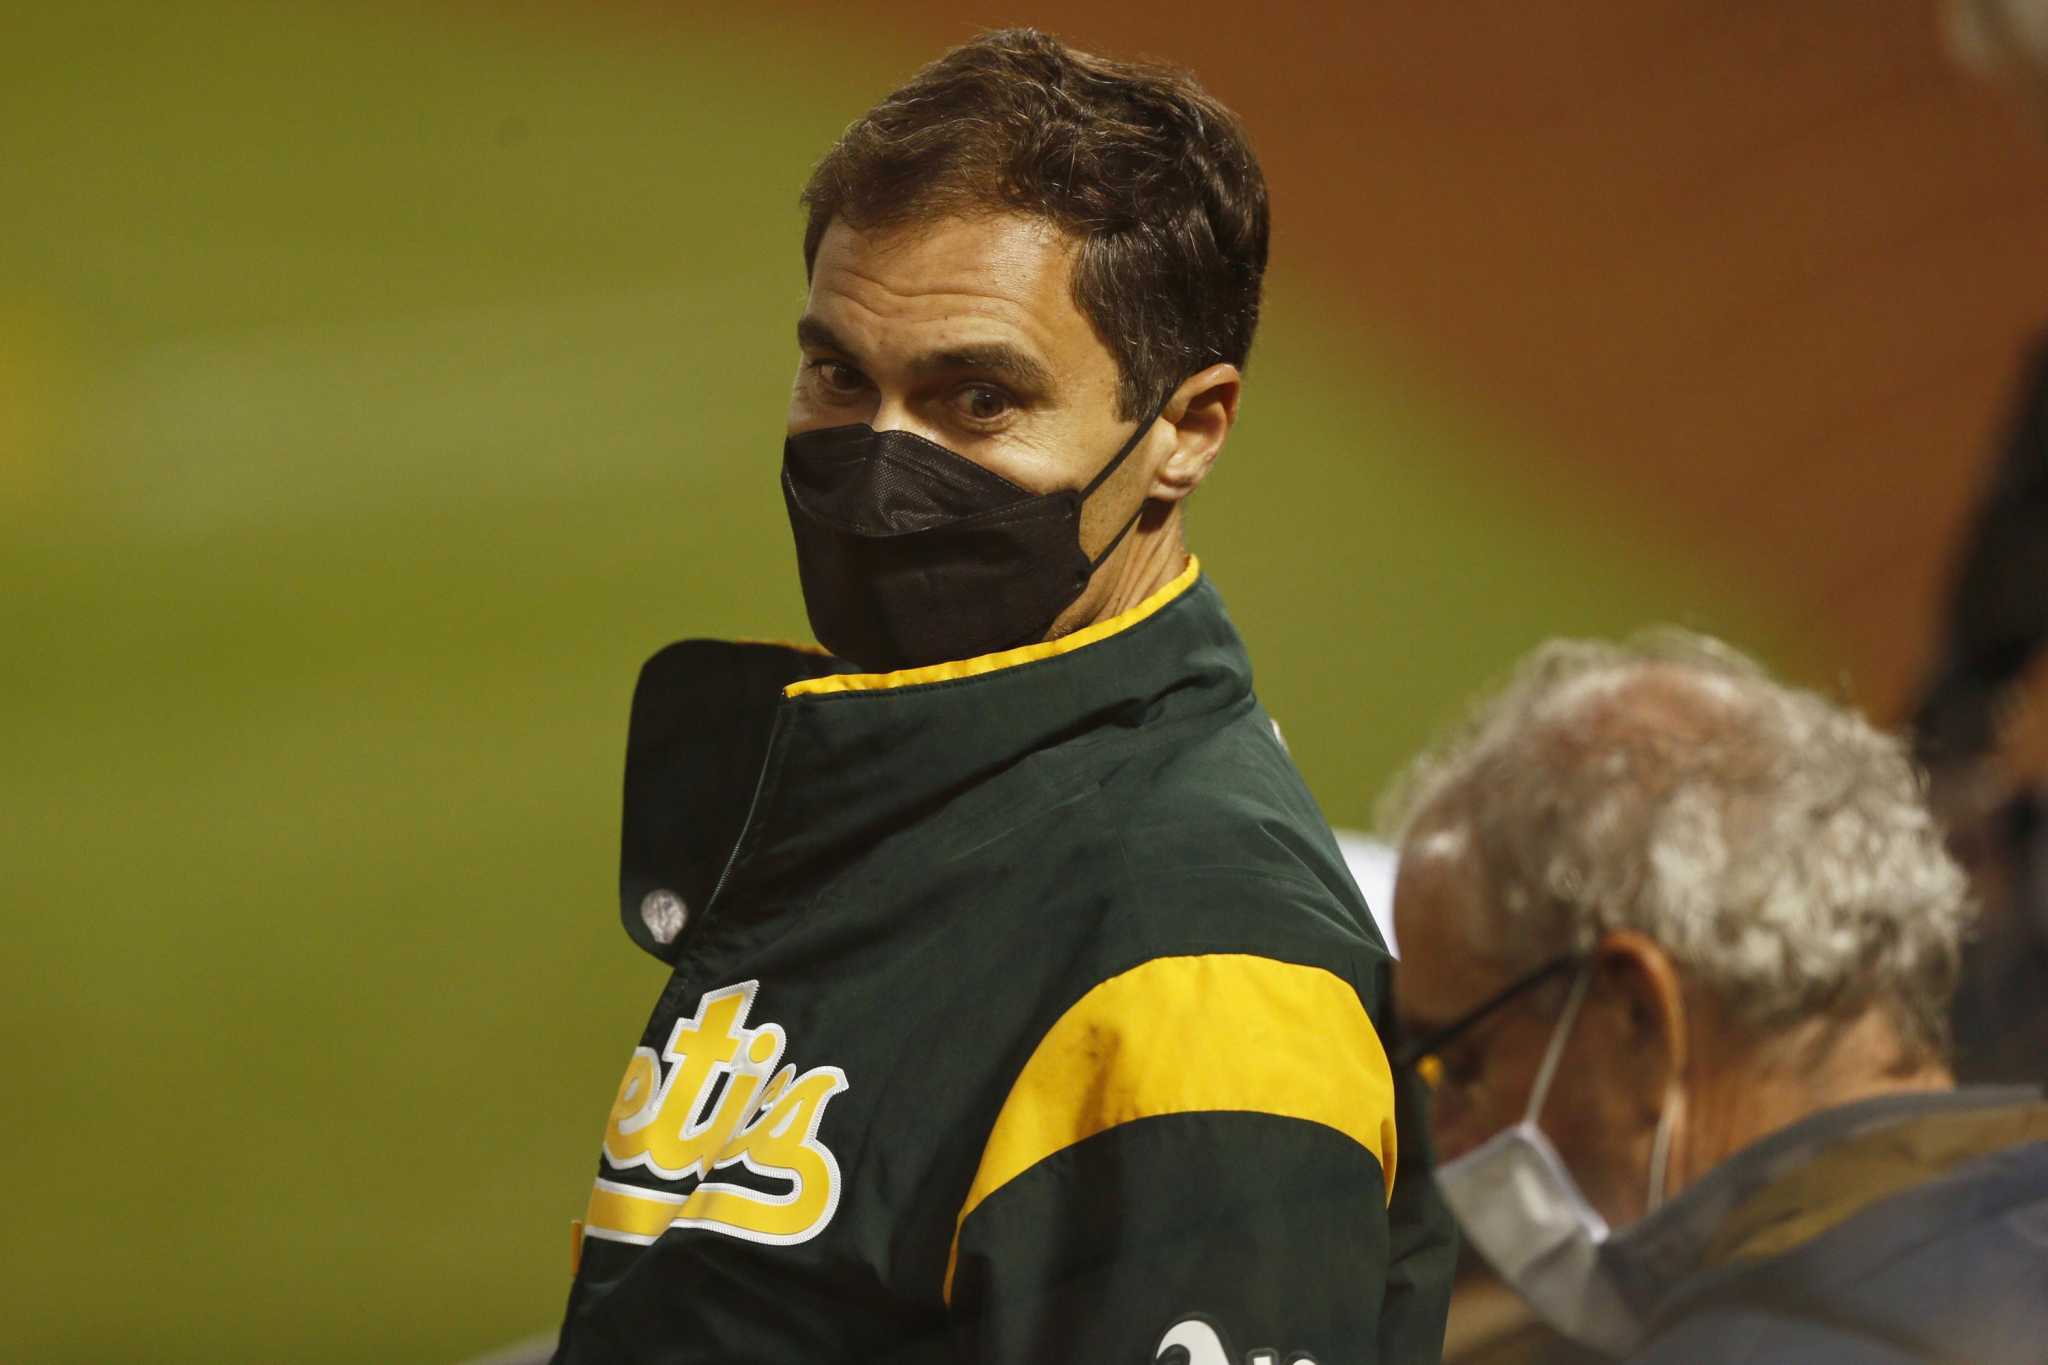 A’s Dave Kaval mocks Giants’ attendance at Oracle Park during Bay Bridge opener